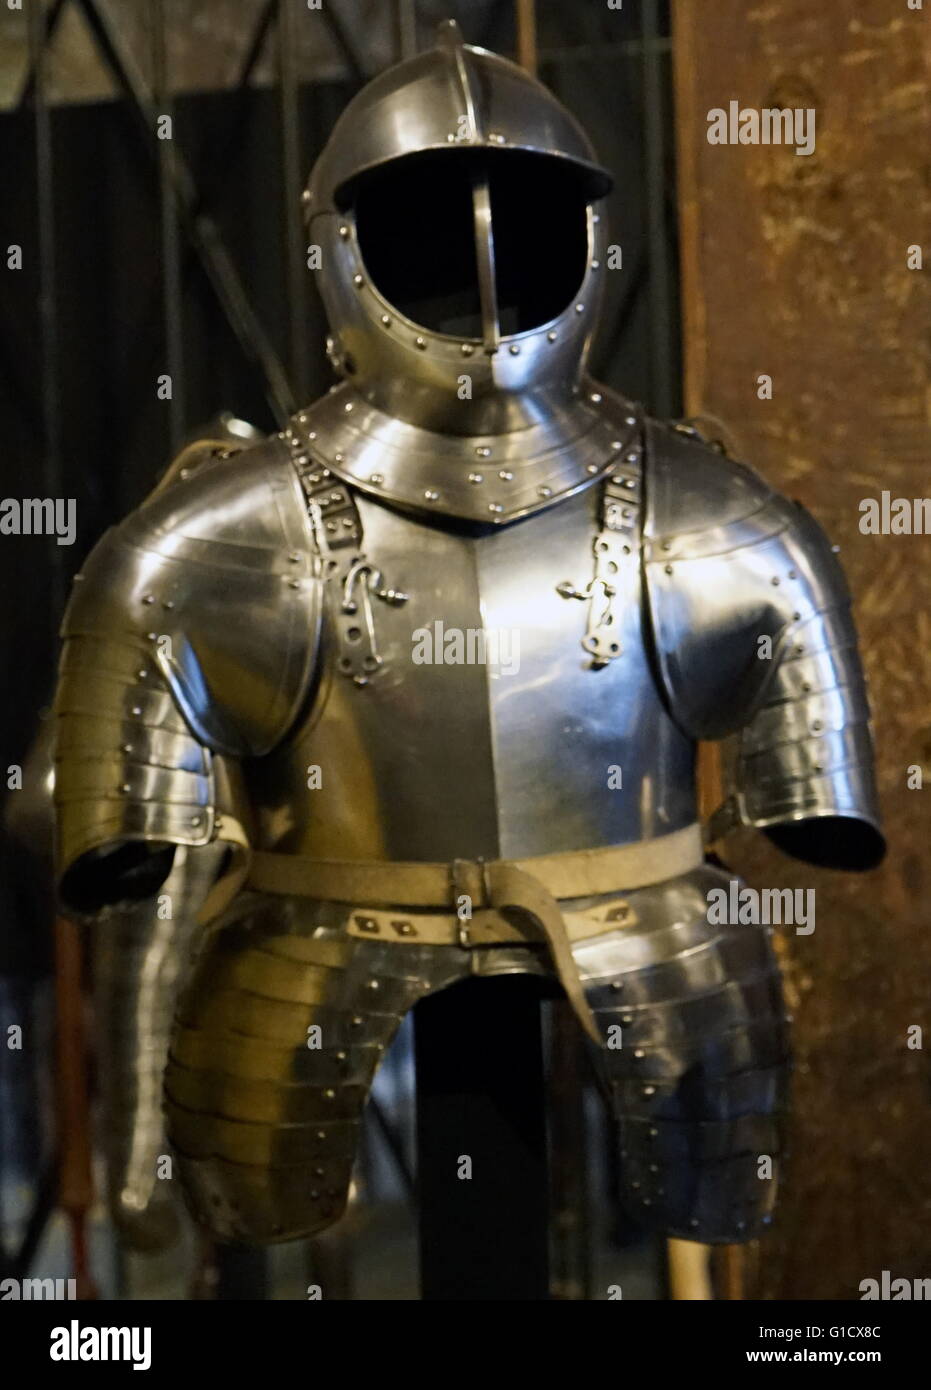 Example of Munition Armours, refers to any mass-produced armour, historically stockpiled in armouries to equip both foot soldiers and mounted cuirassiers. Dated 17th Century Stock Photo